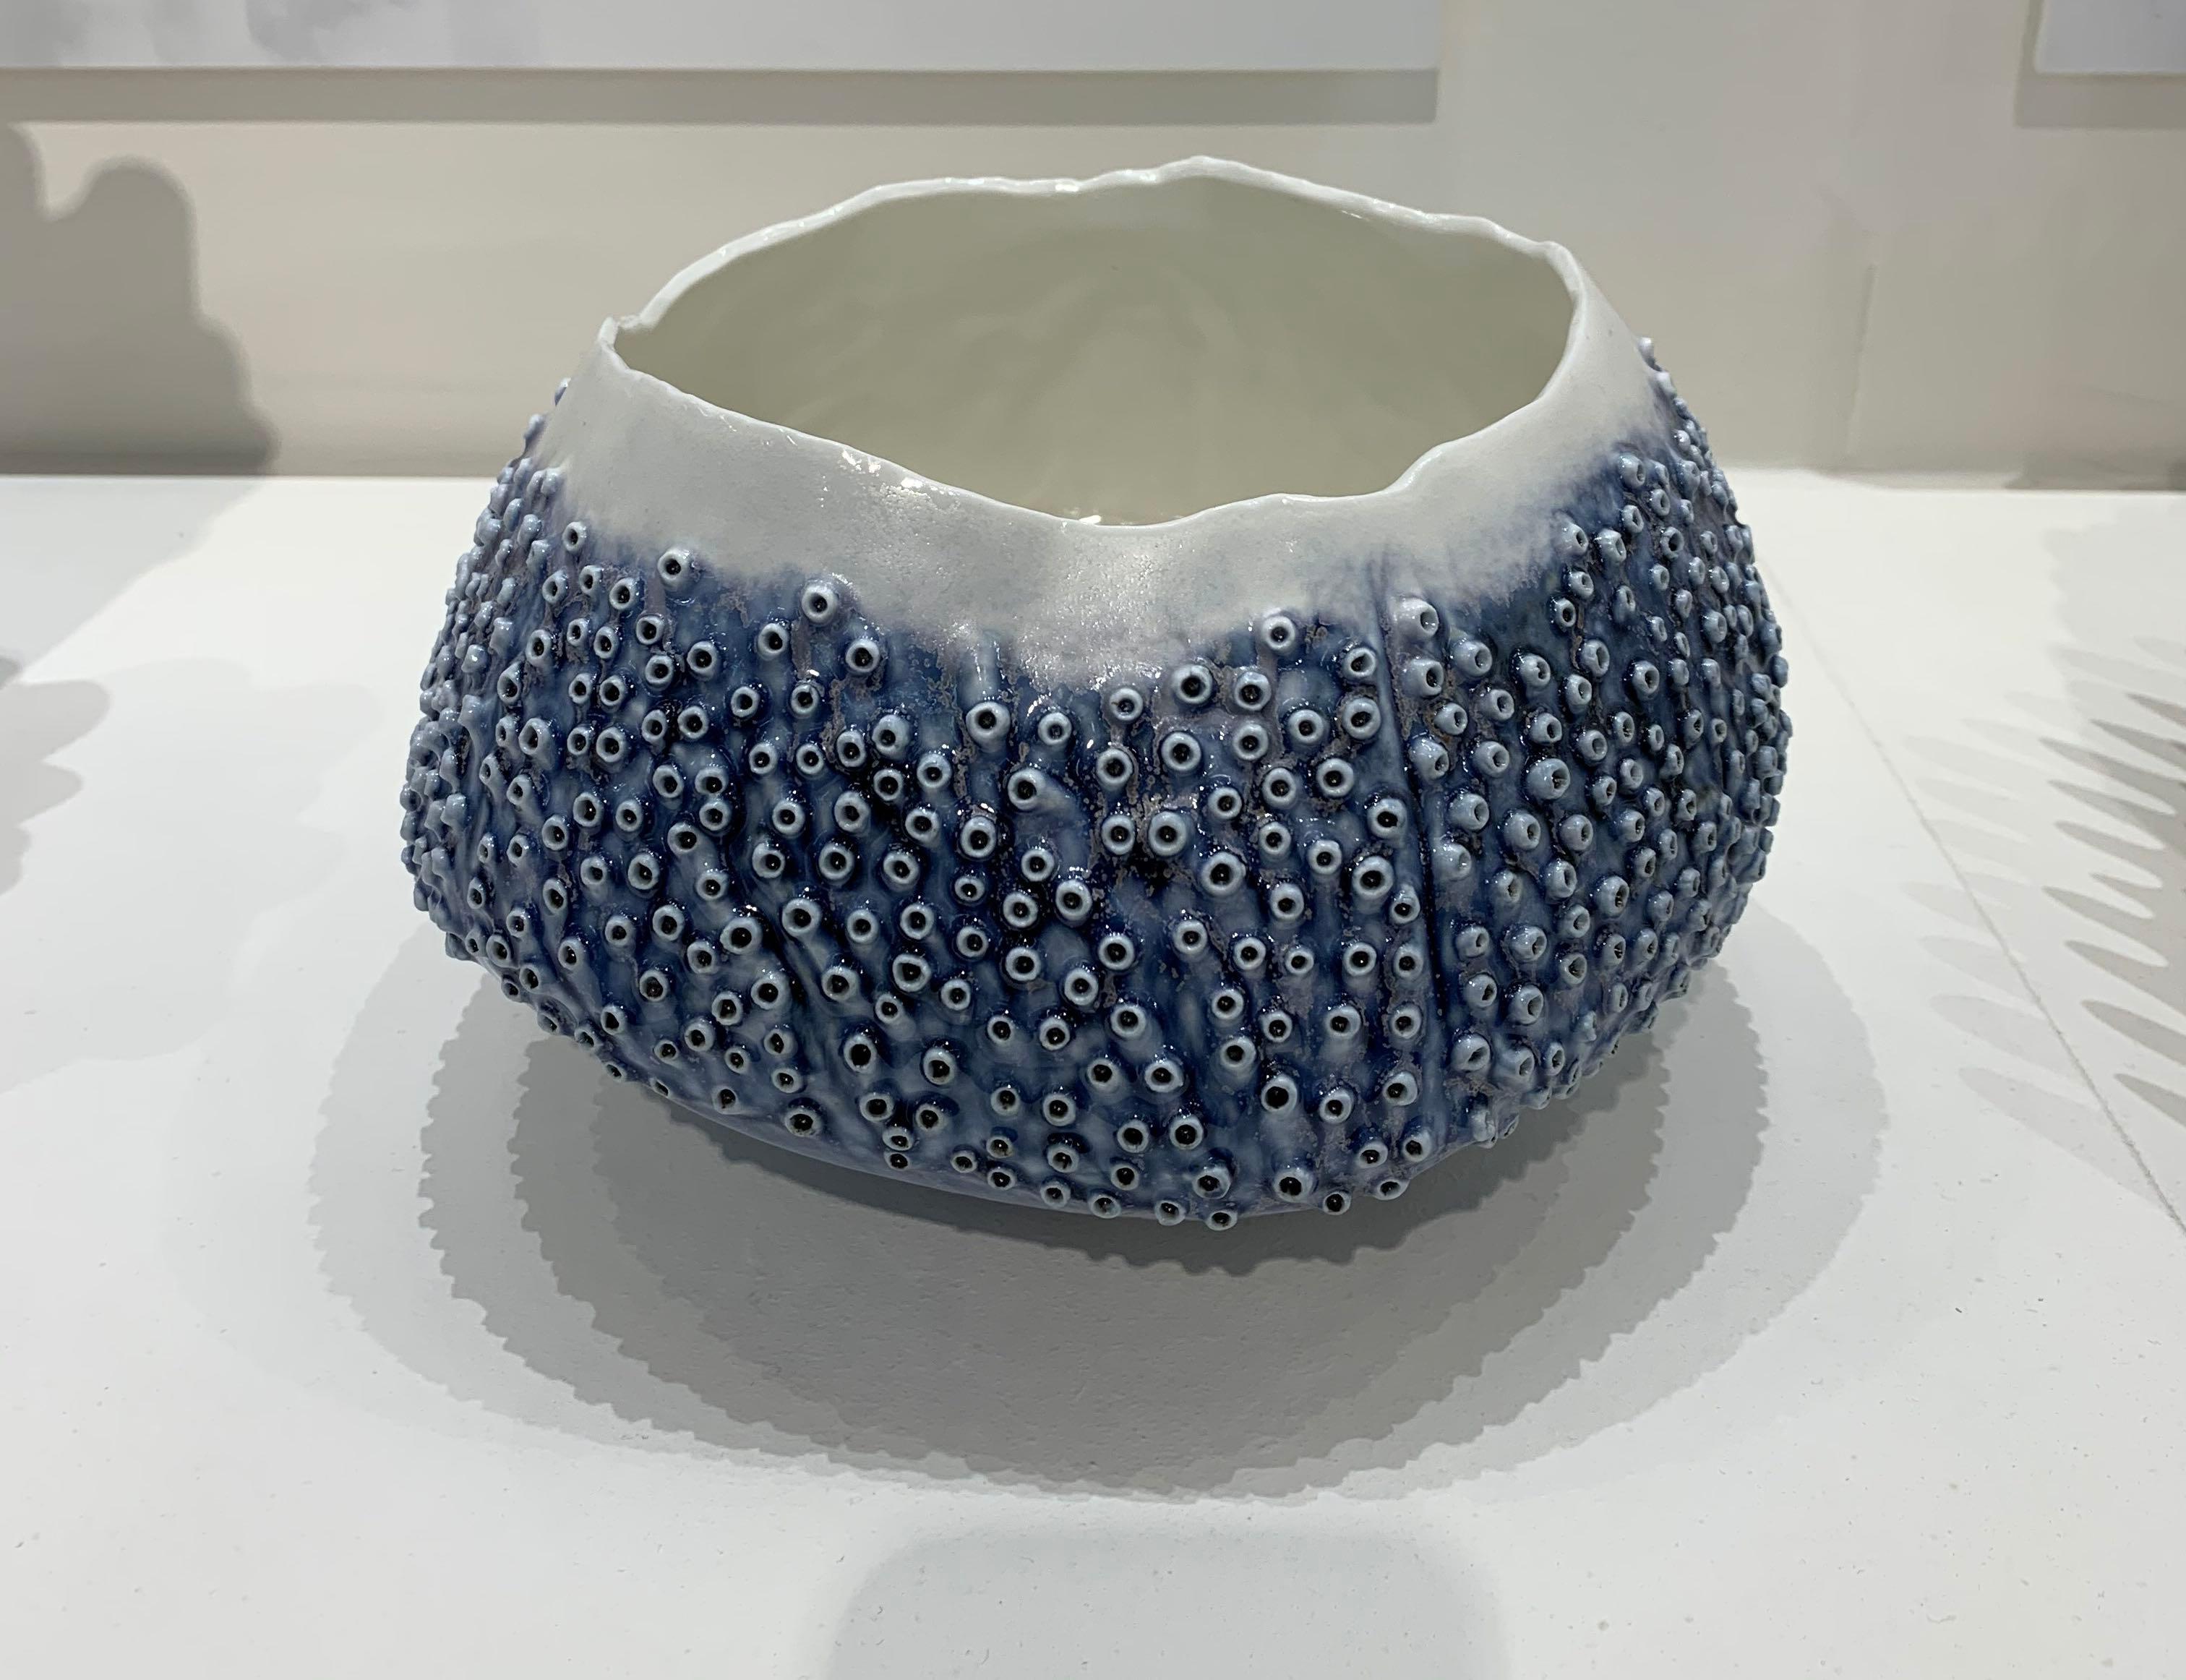 Contemporary Italian handmade porcelain bowl
Design inspired by sea coral
White bottom glaze with ocean blue color 